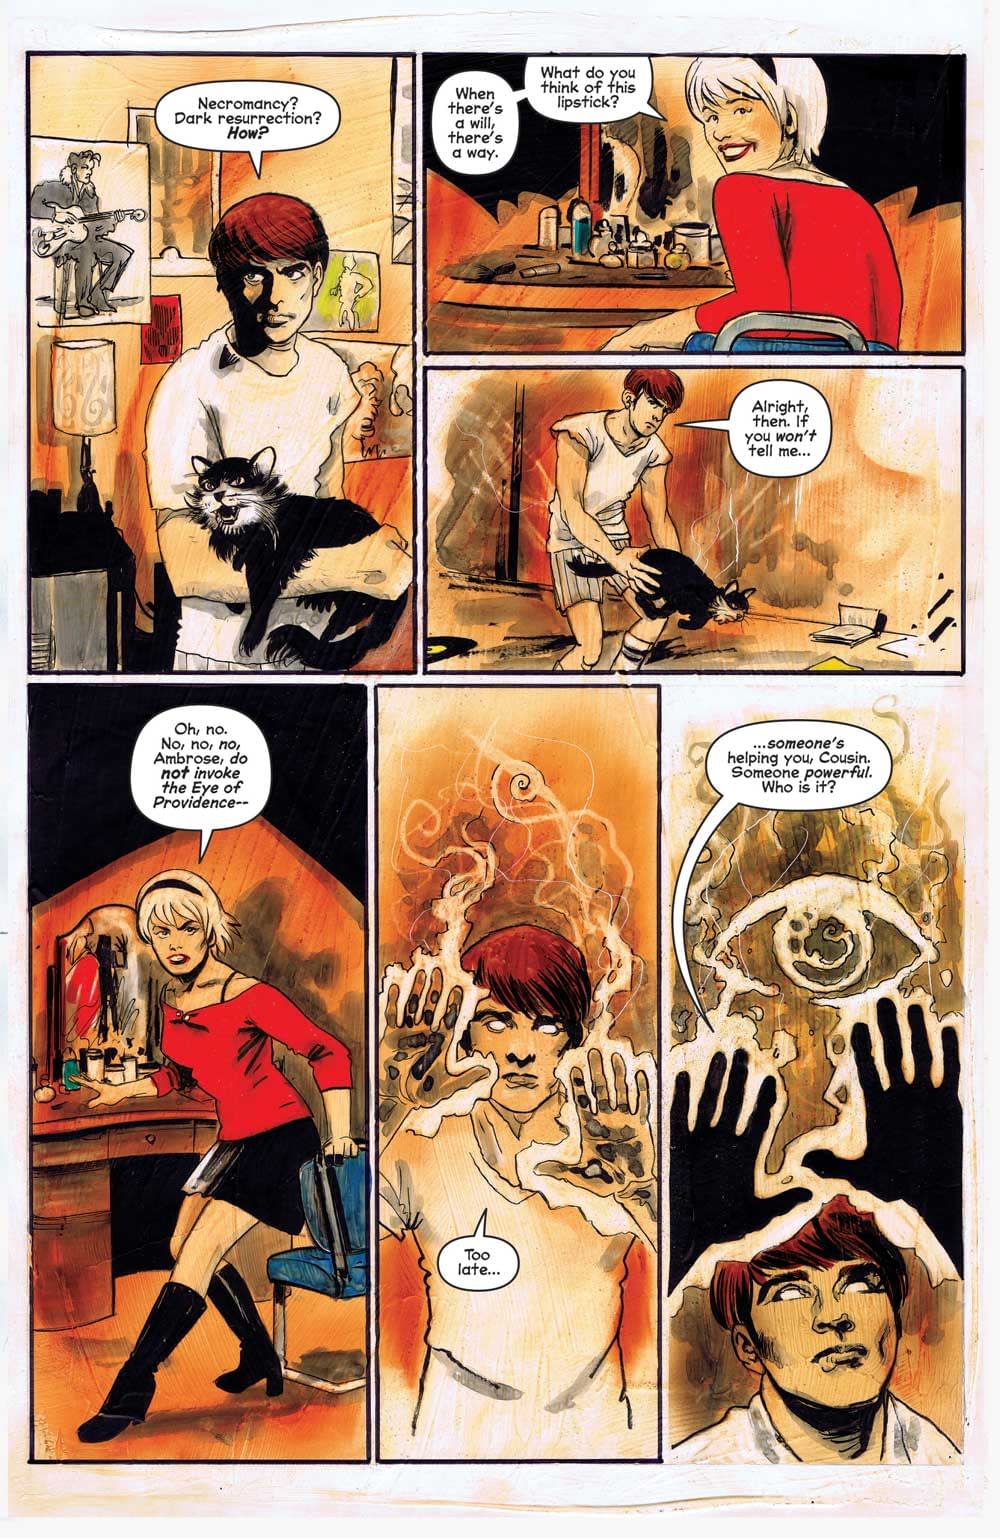 Chilling Adventures Of Sabrina #8 Set For Release Next Week For Record Second Consecutive Month (Preview)